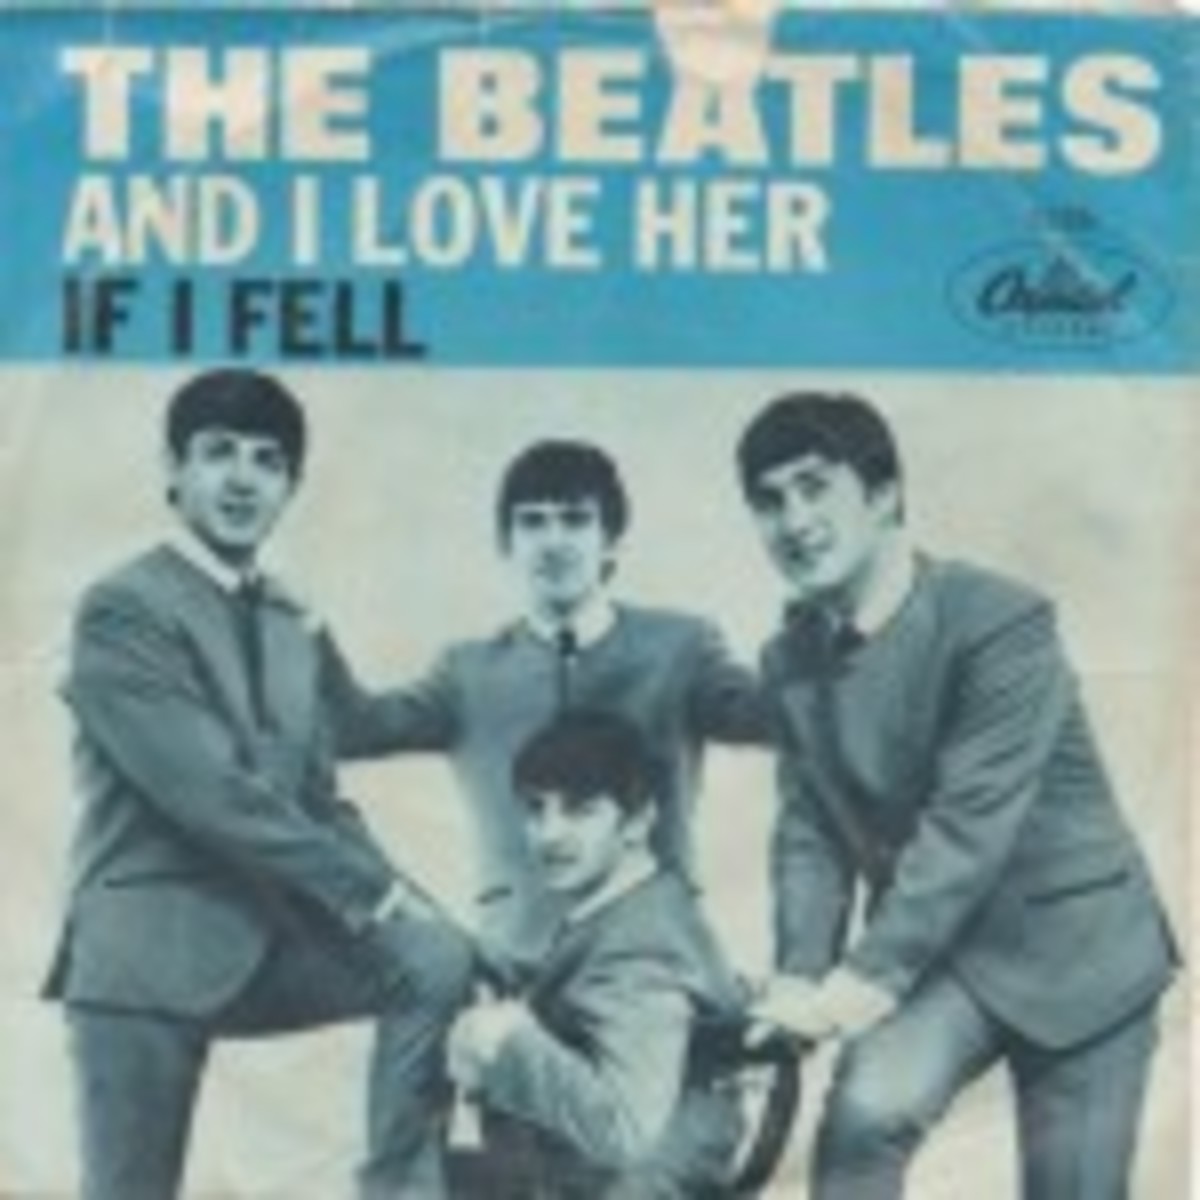 The Beatles And I Love Her